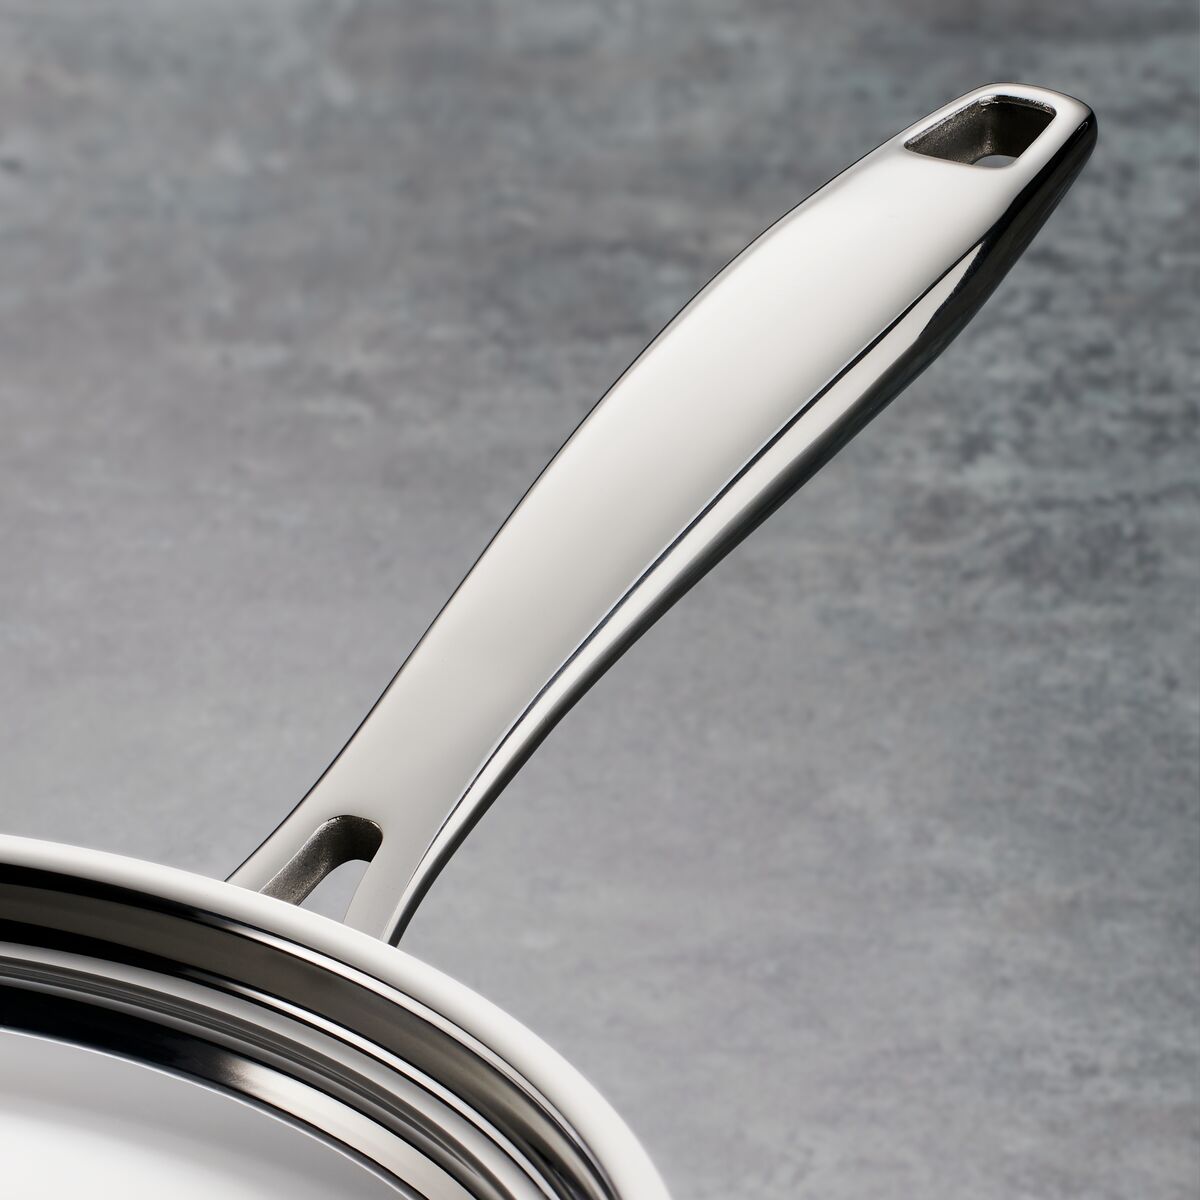 All-Clad vs. Tramontina Stainless-Steel Skillets, Tested & Reviewed